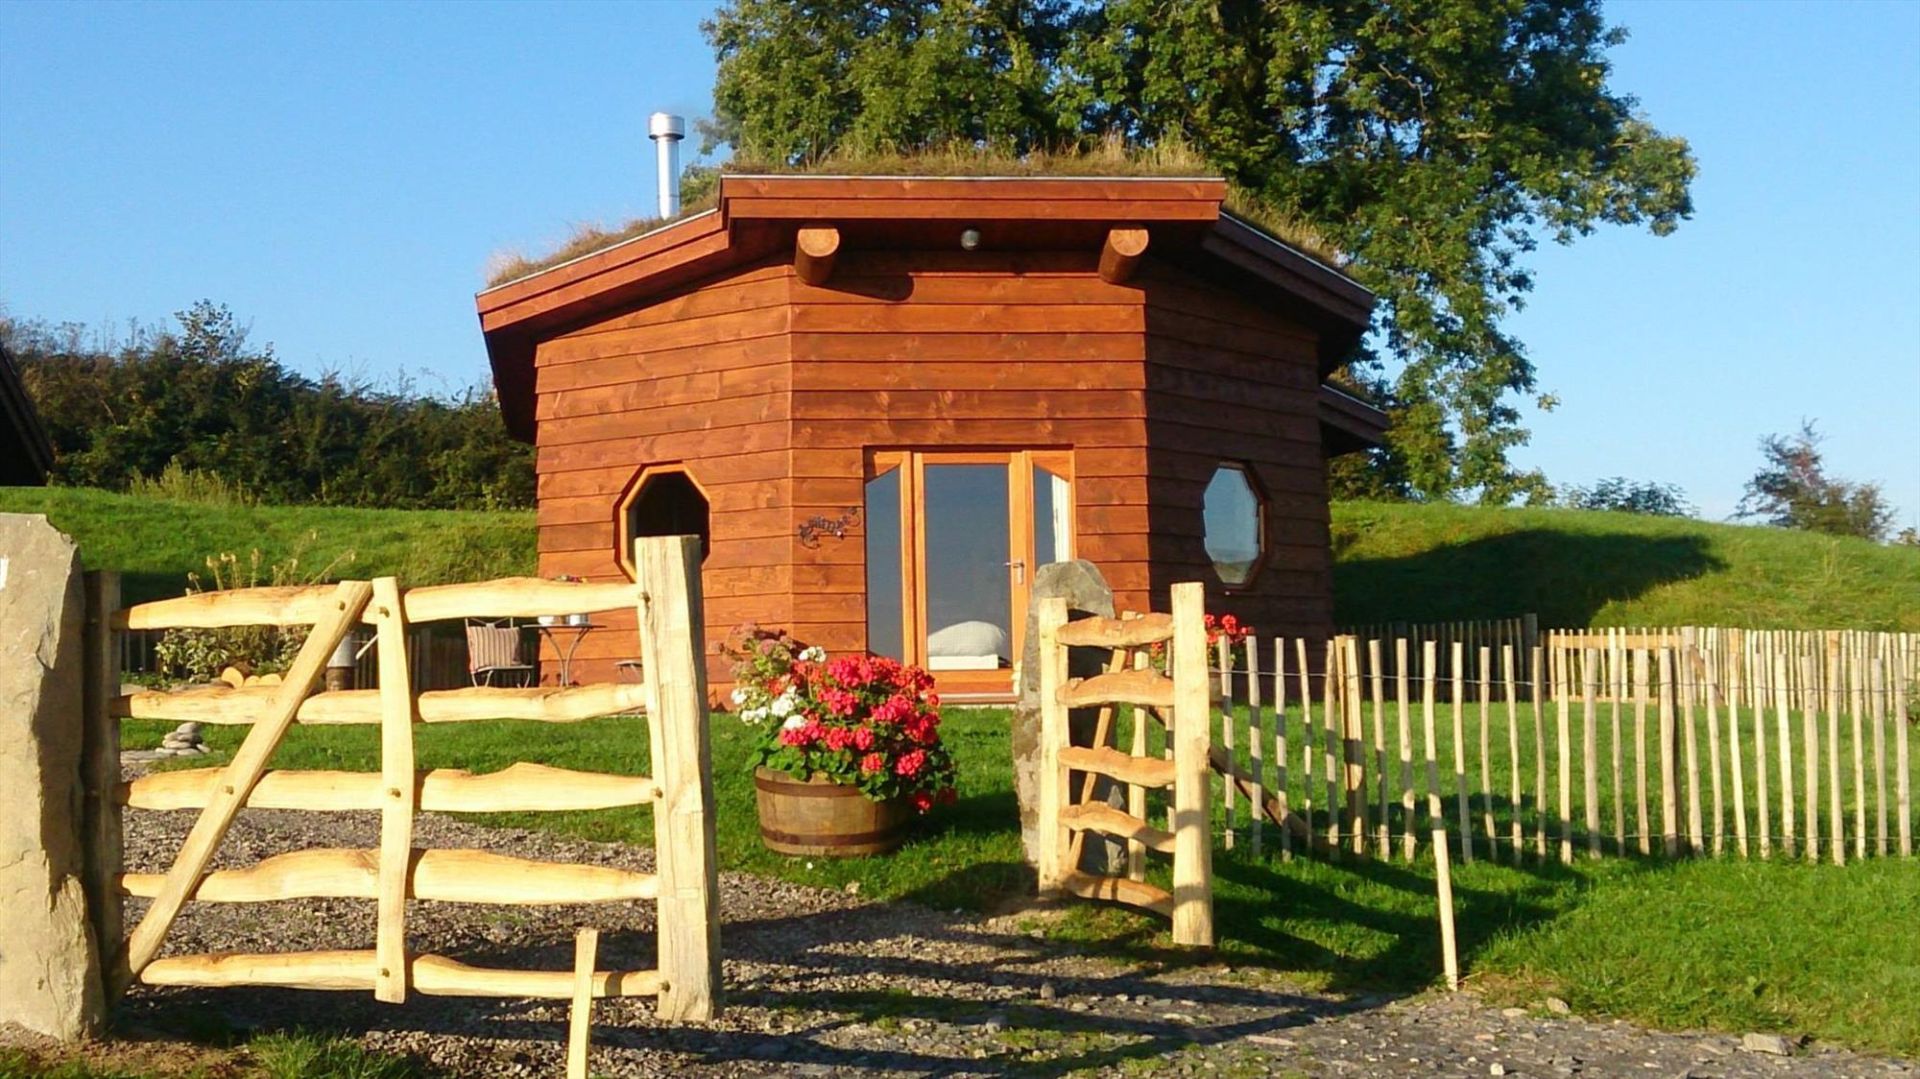 Self Catering Holiday Accommodation In Wales